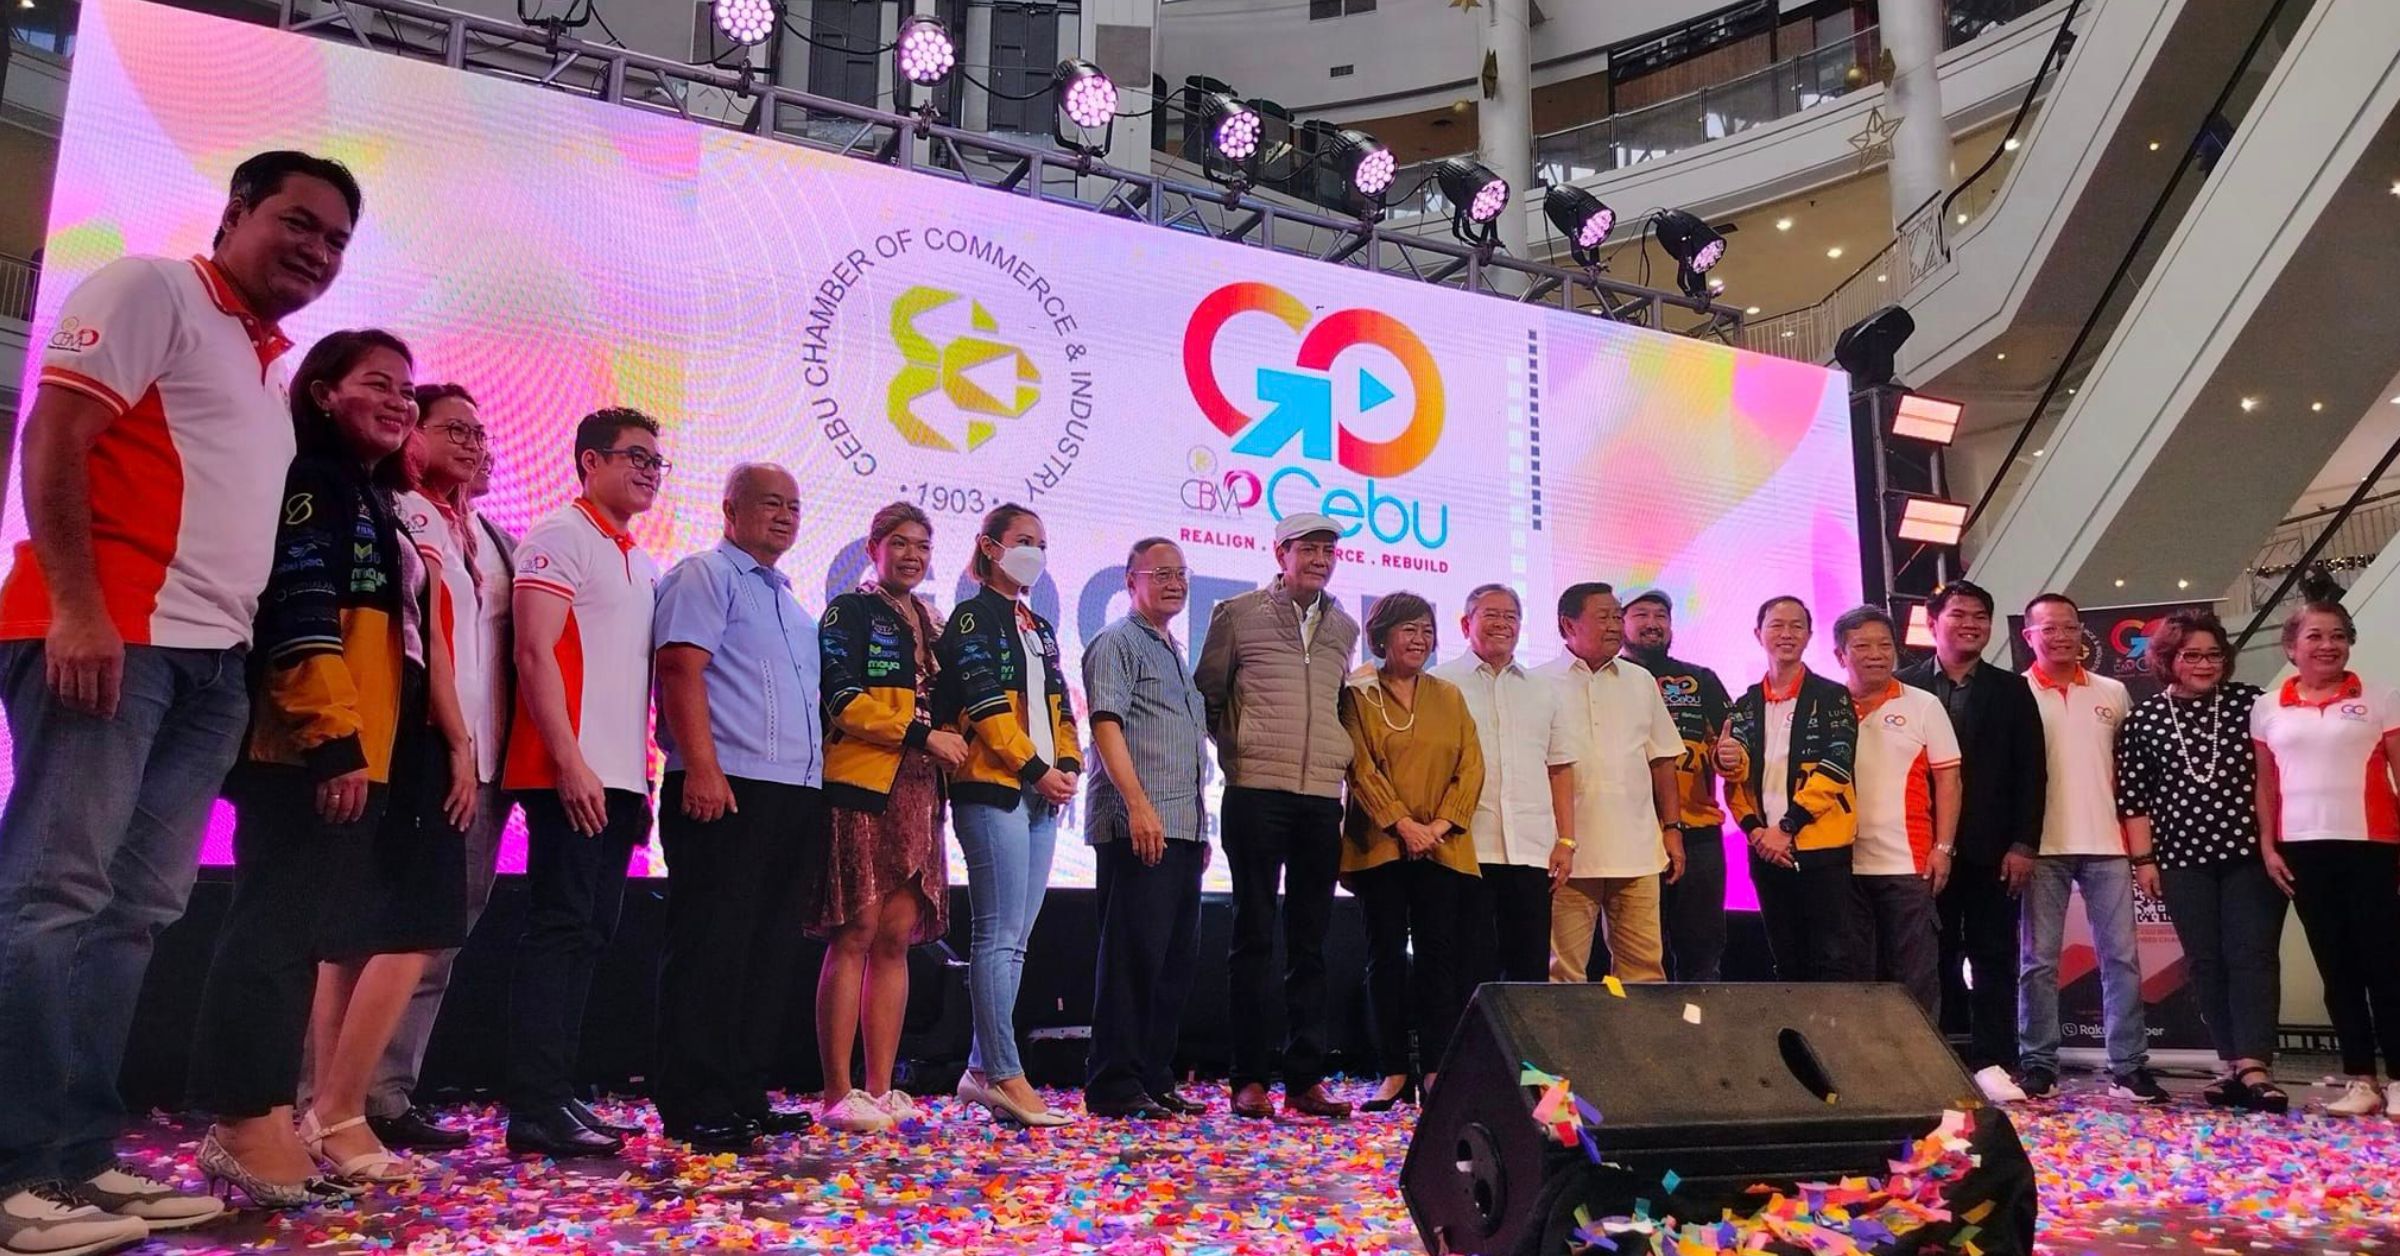 Go Cebu Grand Expo and Exhibit: New tools, tech solutions for business